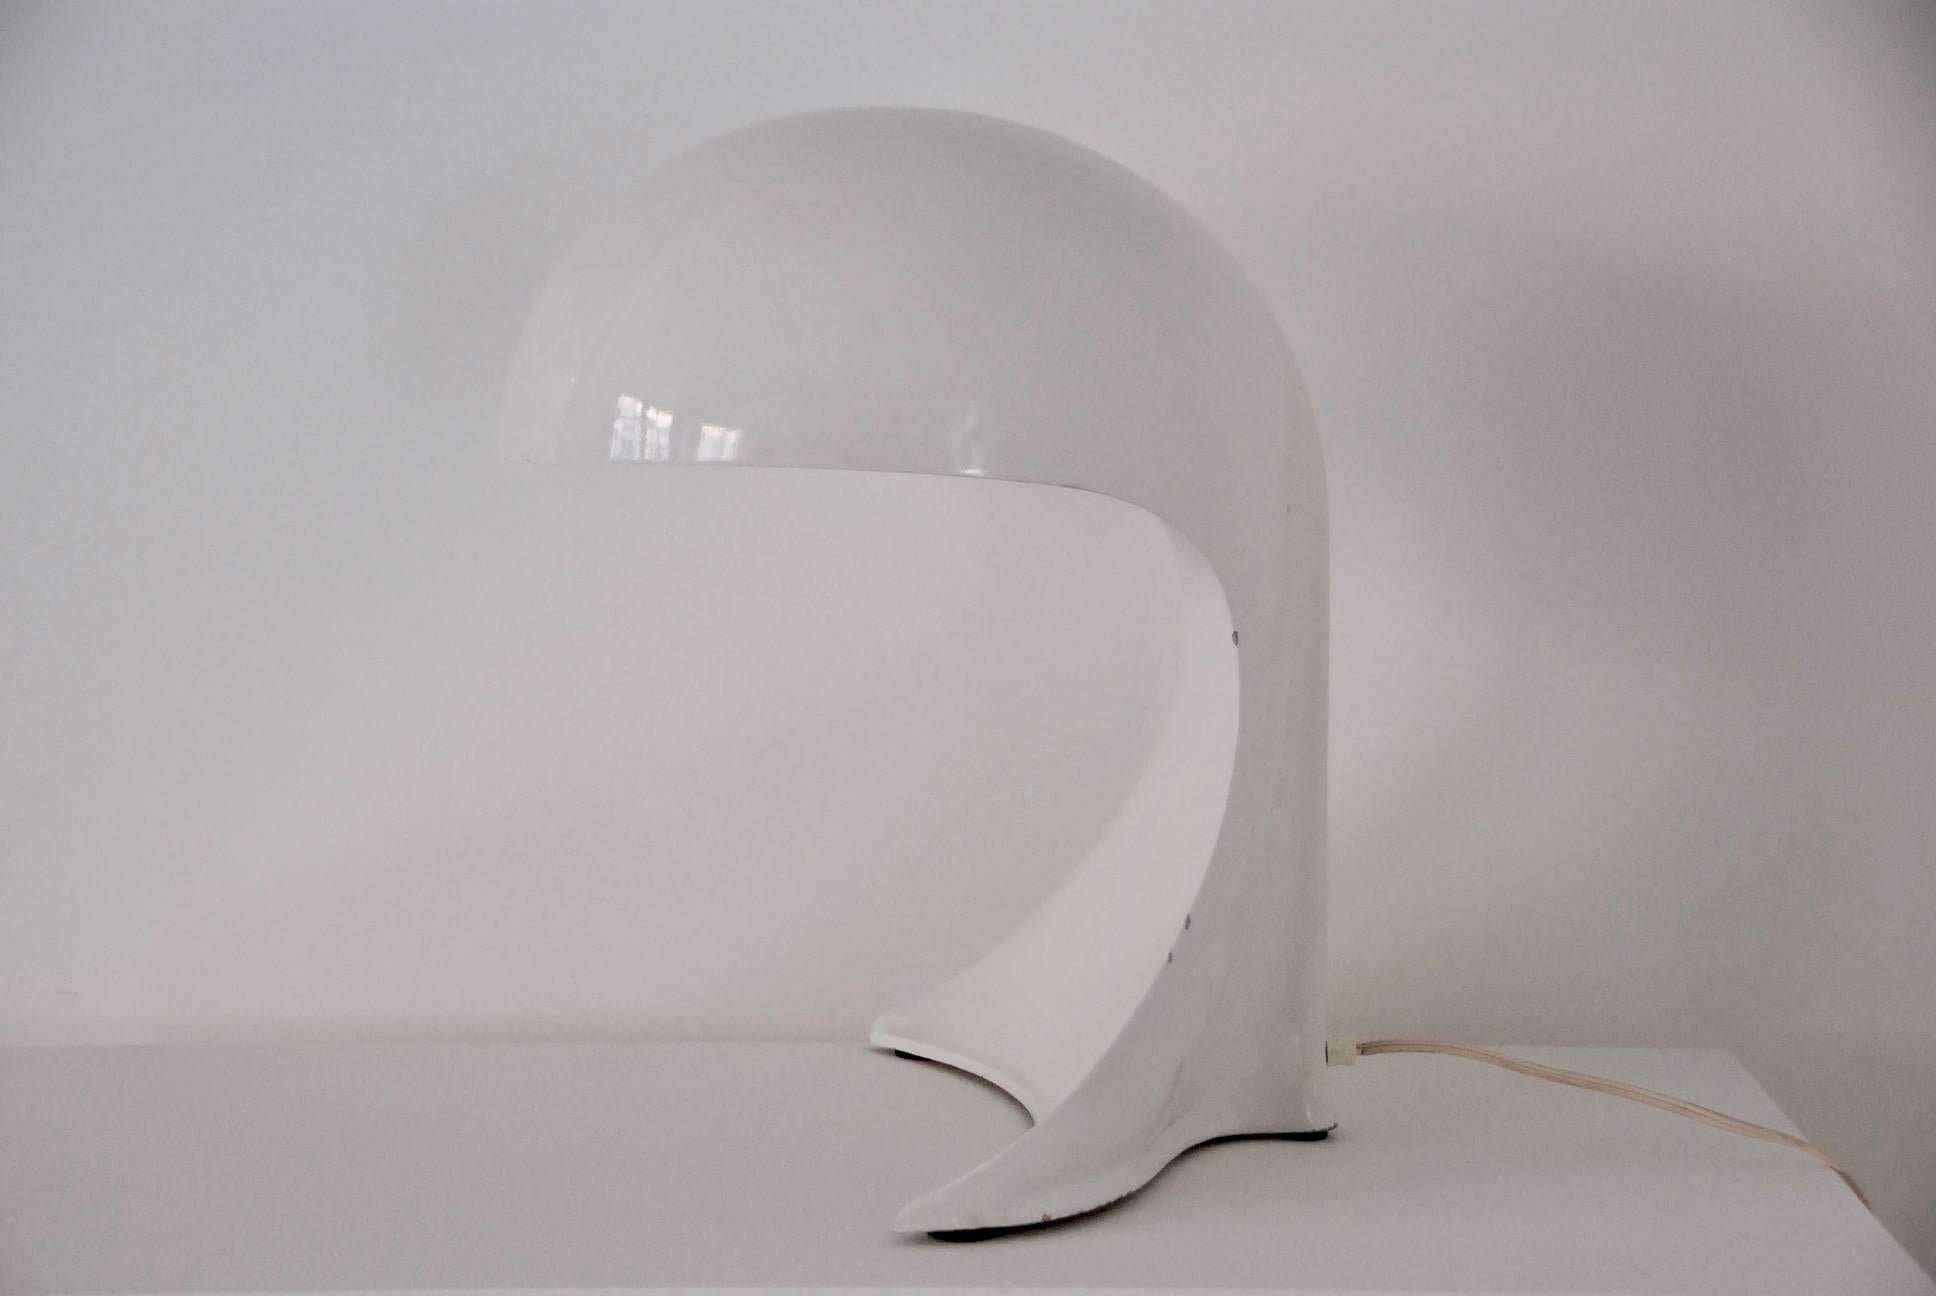 Very nice curved aluminium table lamp, this model 